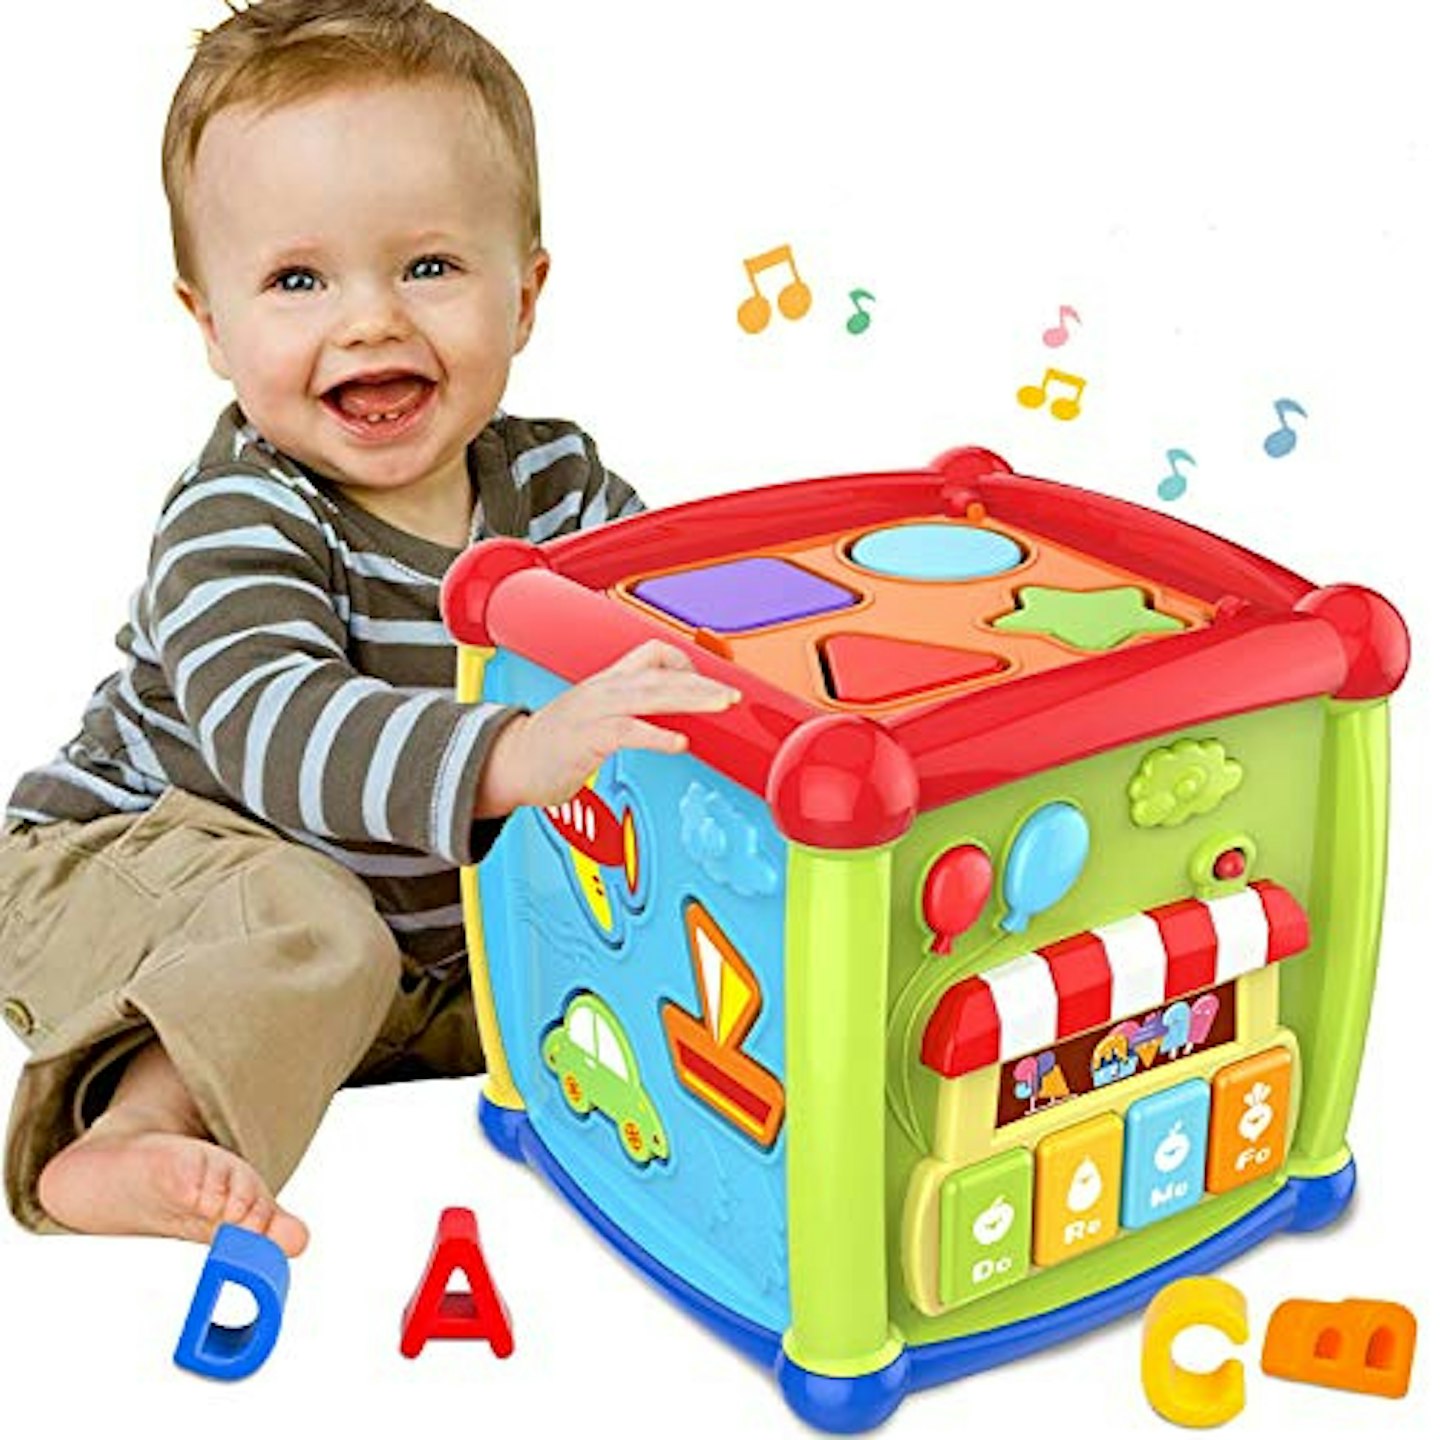 The Best Educational Toys For 1 Year Olds